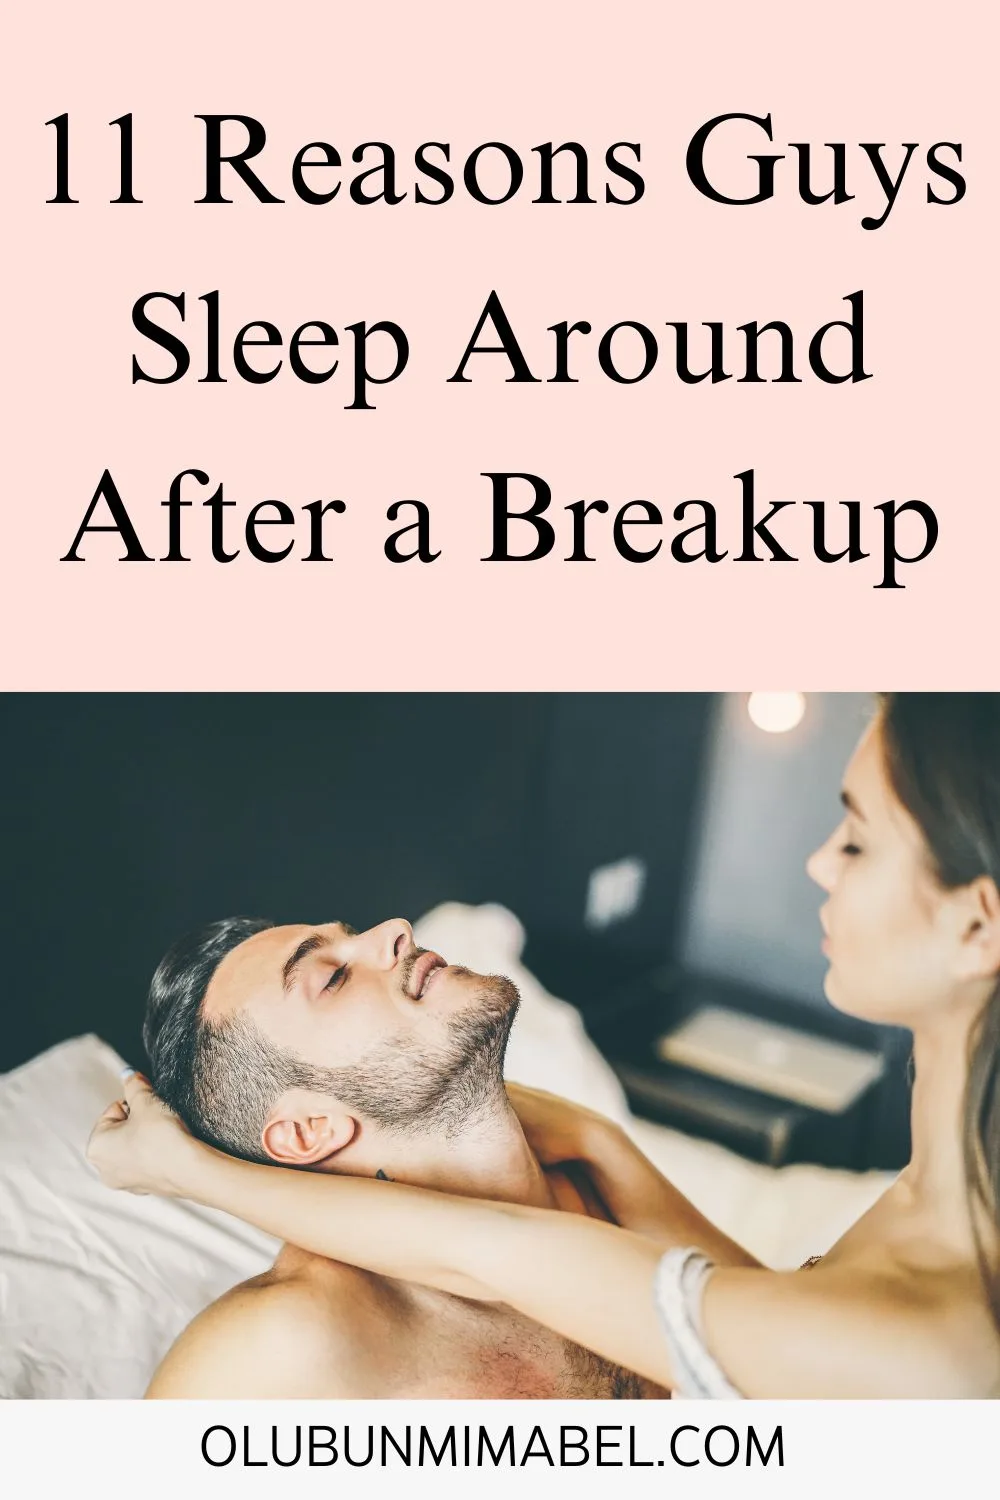 Why Do Guys Sleep Around After a Breakup?